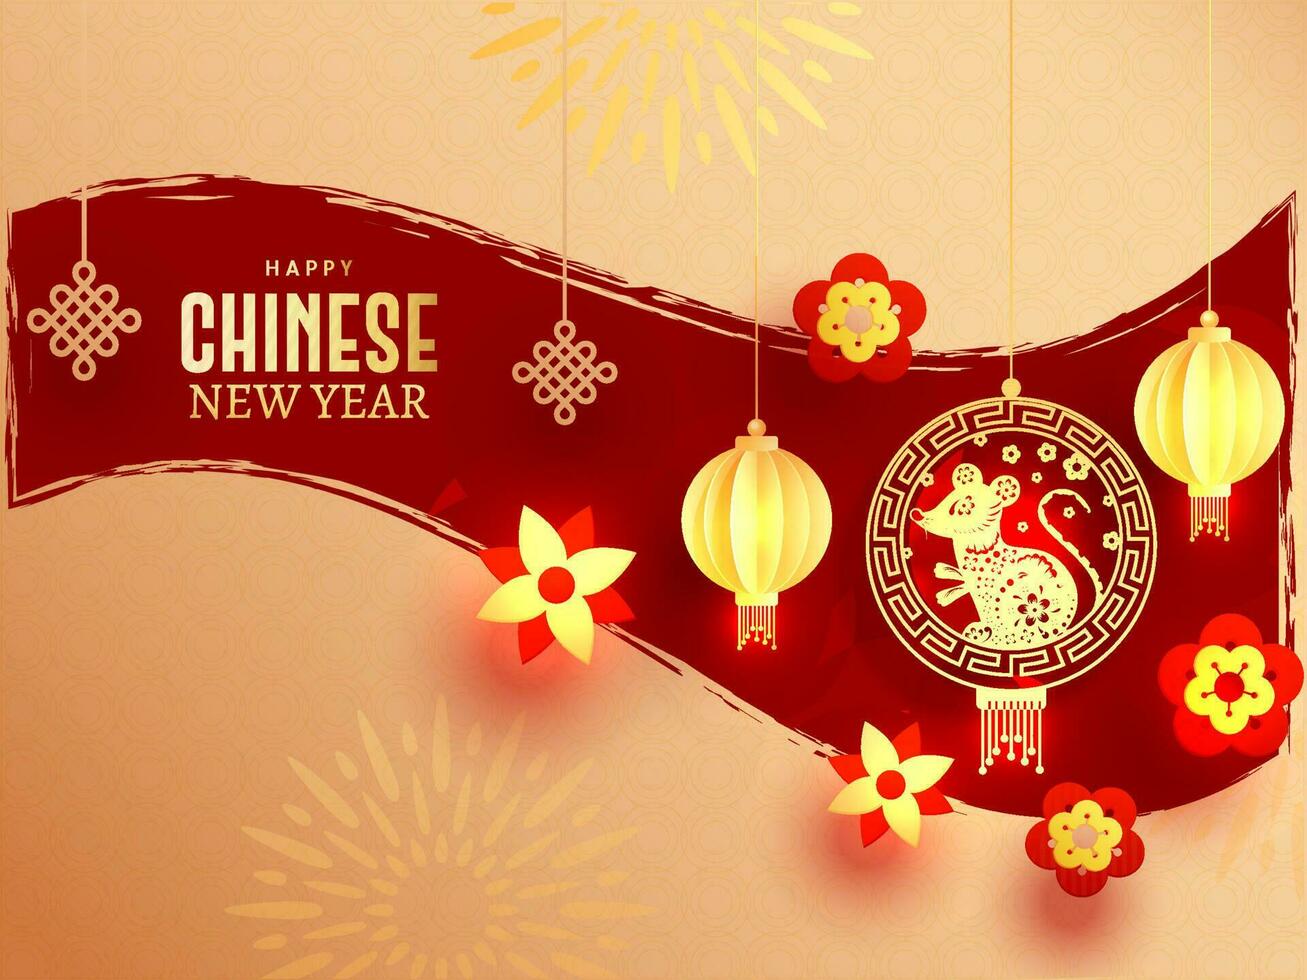 Greeting card design decorated with hanging paper cut lanterns, flowers with lights effect and rat zodiac sign for Happy Chinese New Year celebration. vector